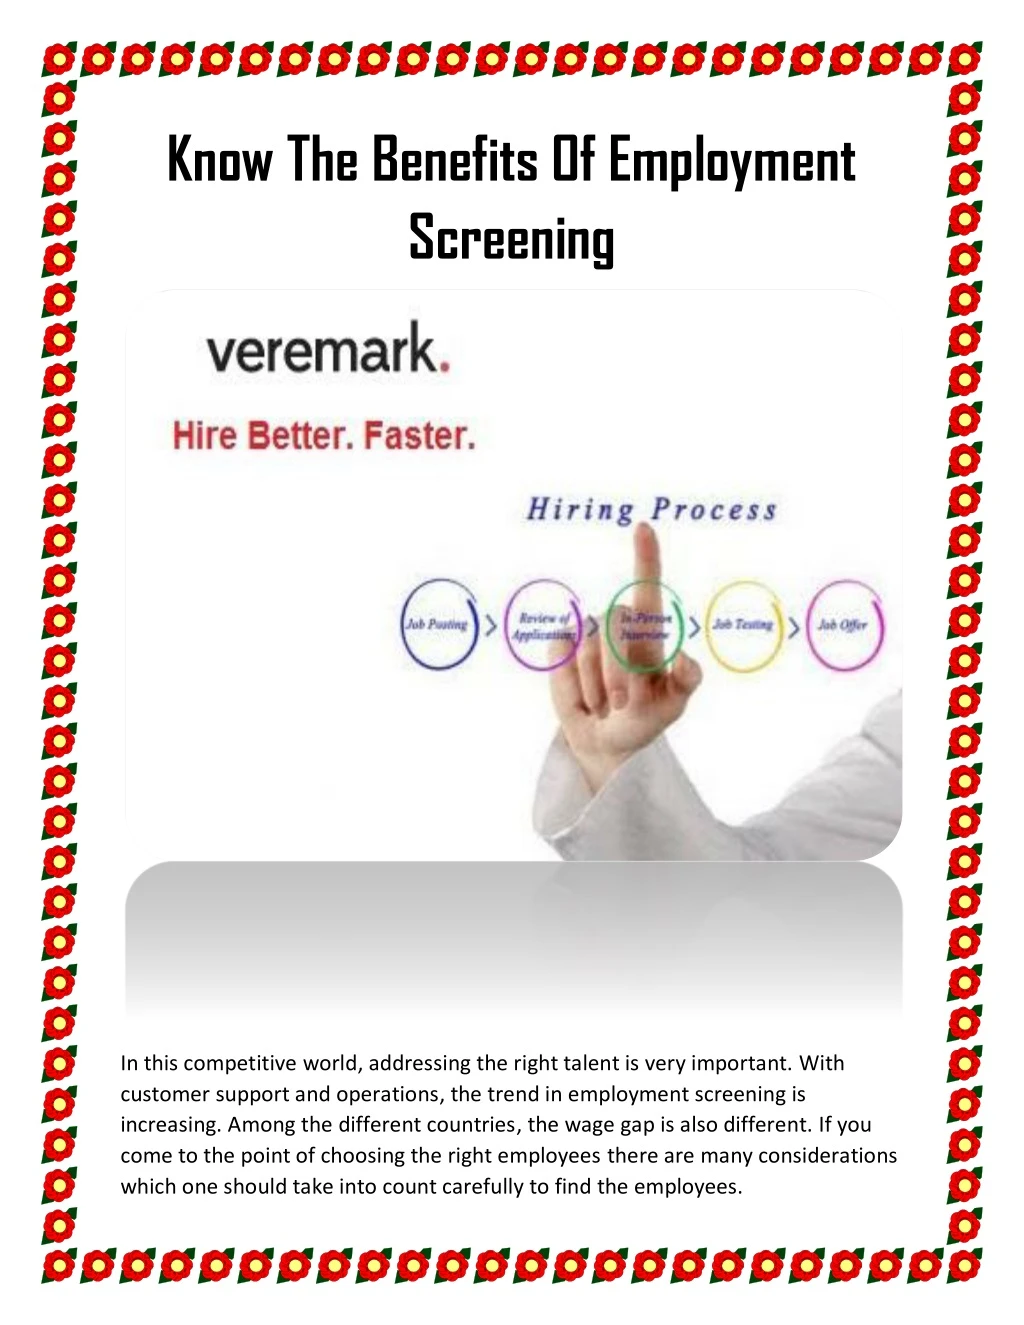 know the benefits of employment screening